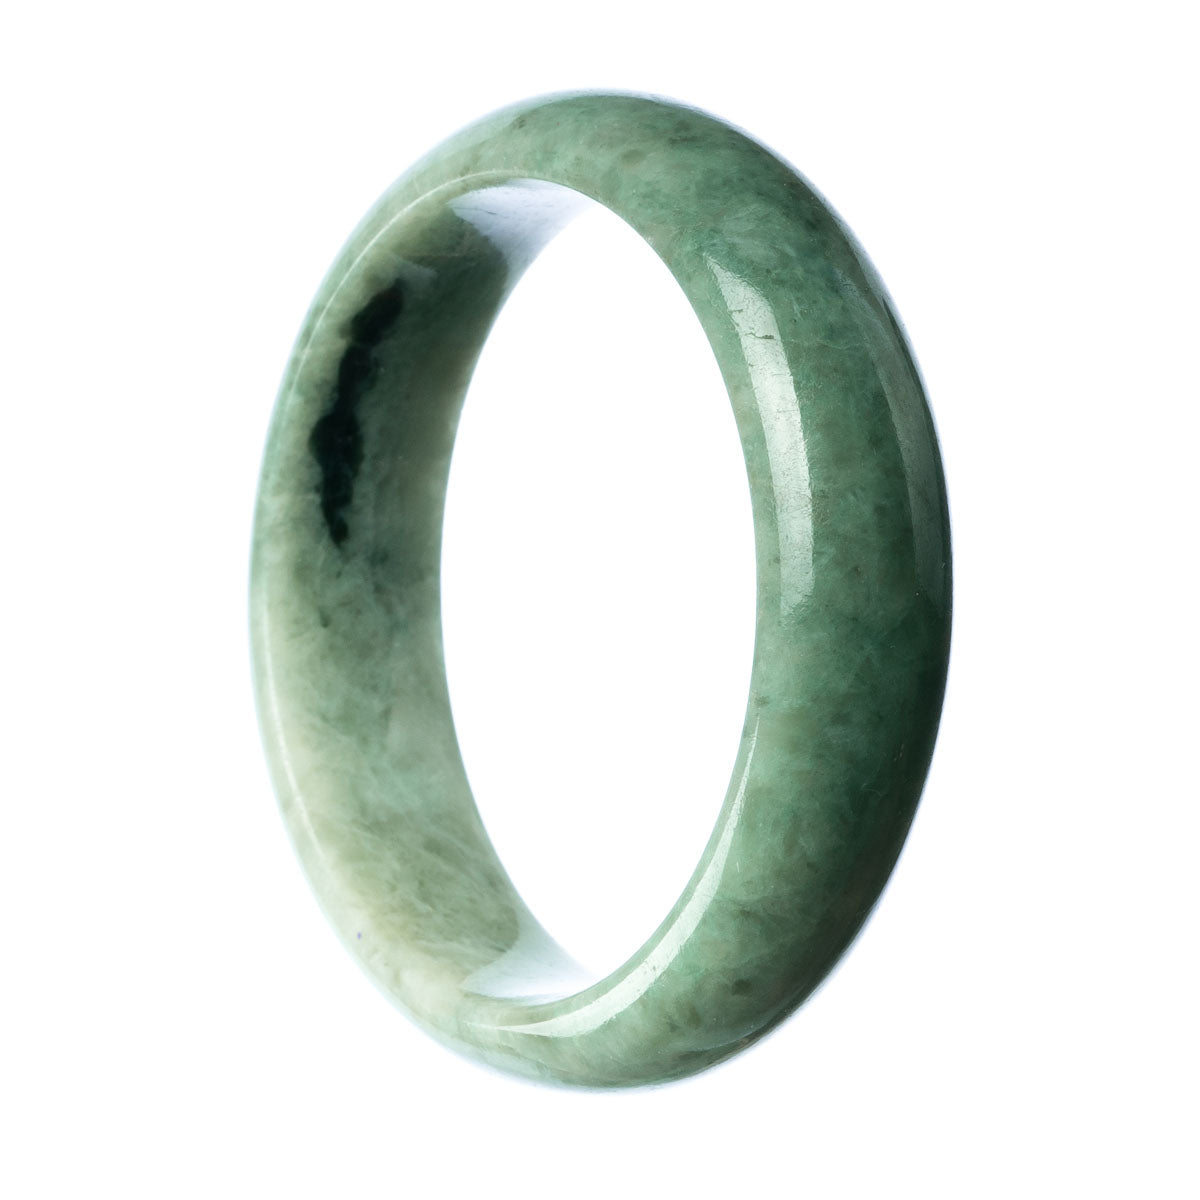 A half moon-shaped certified Type A Green Jadeite Jade bangle bracelet measuring 62mm in size, offered by MAYS.